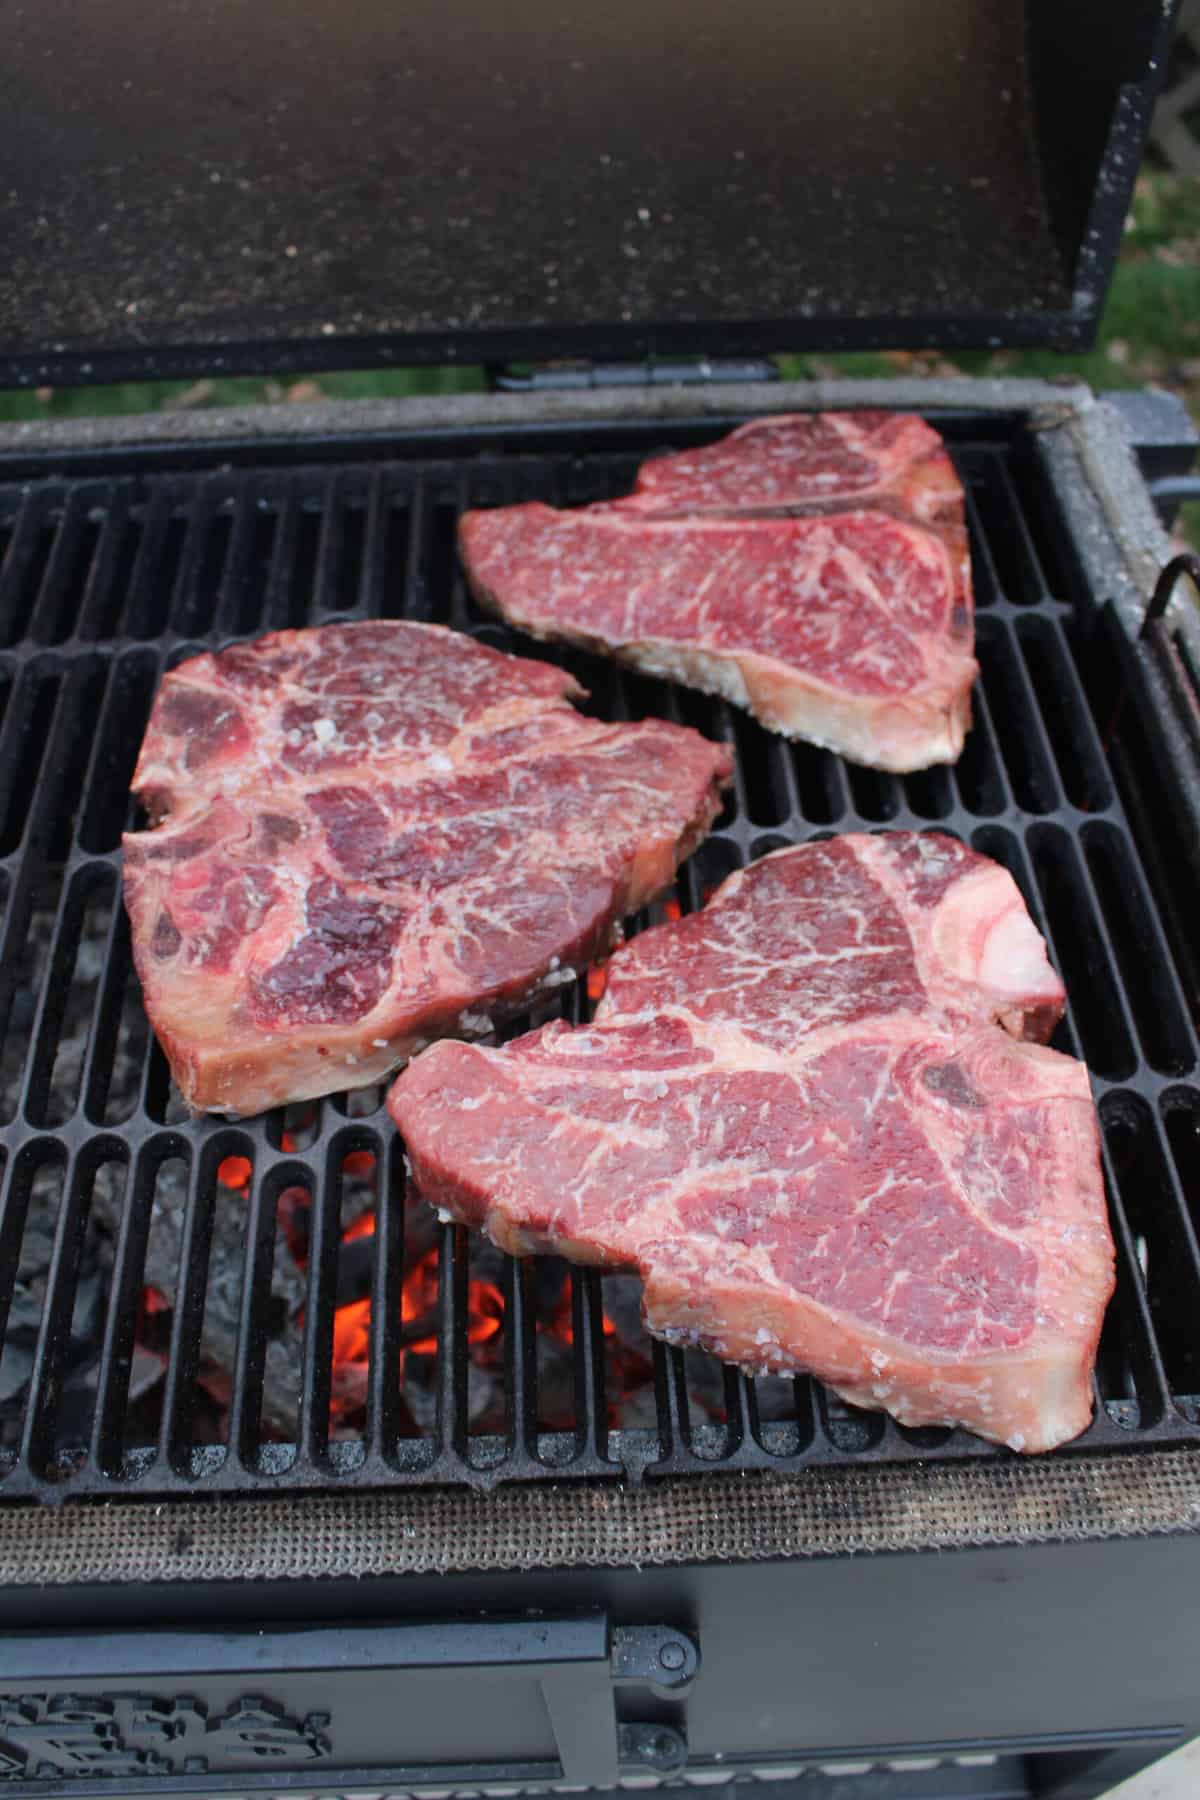 The raw steaks getting placed on the grill.